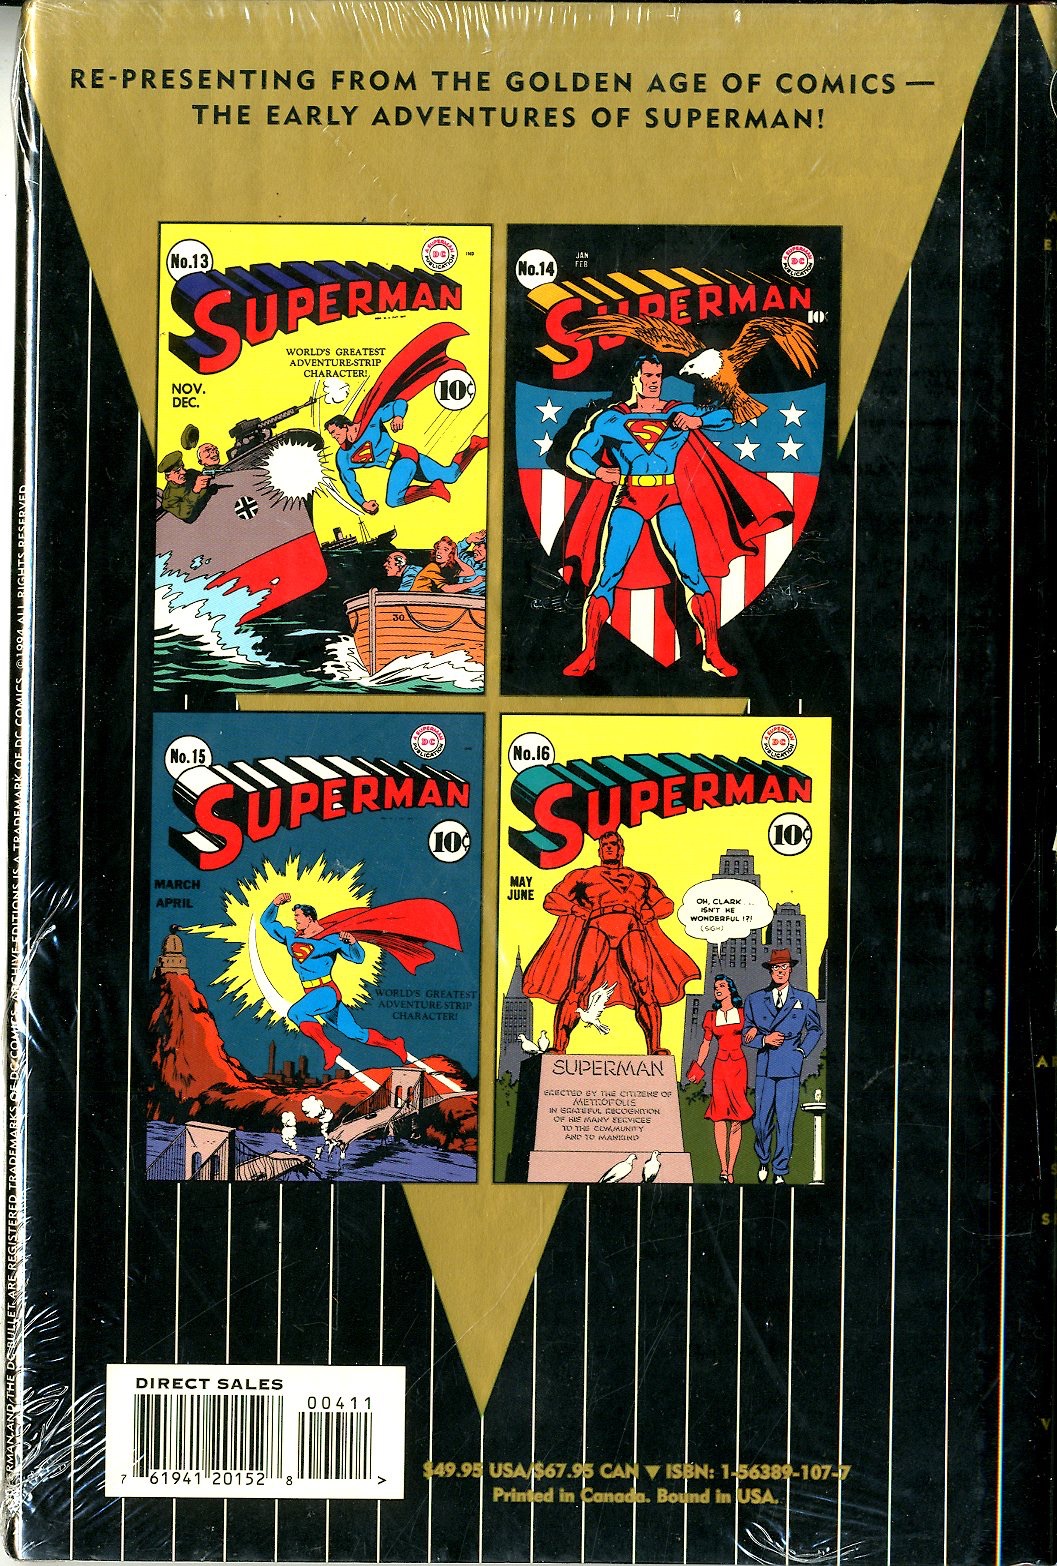 Archive Editions Superman - 11260